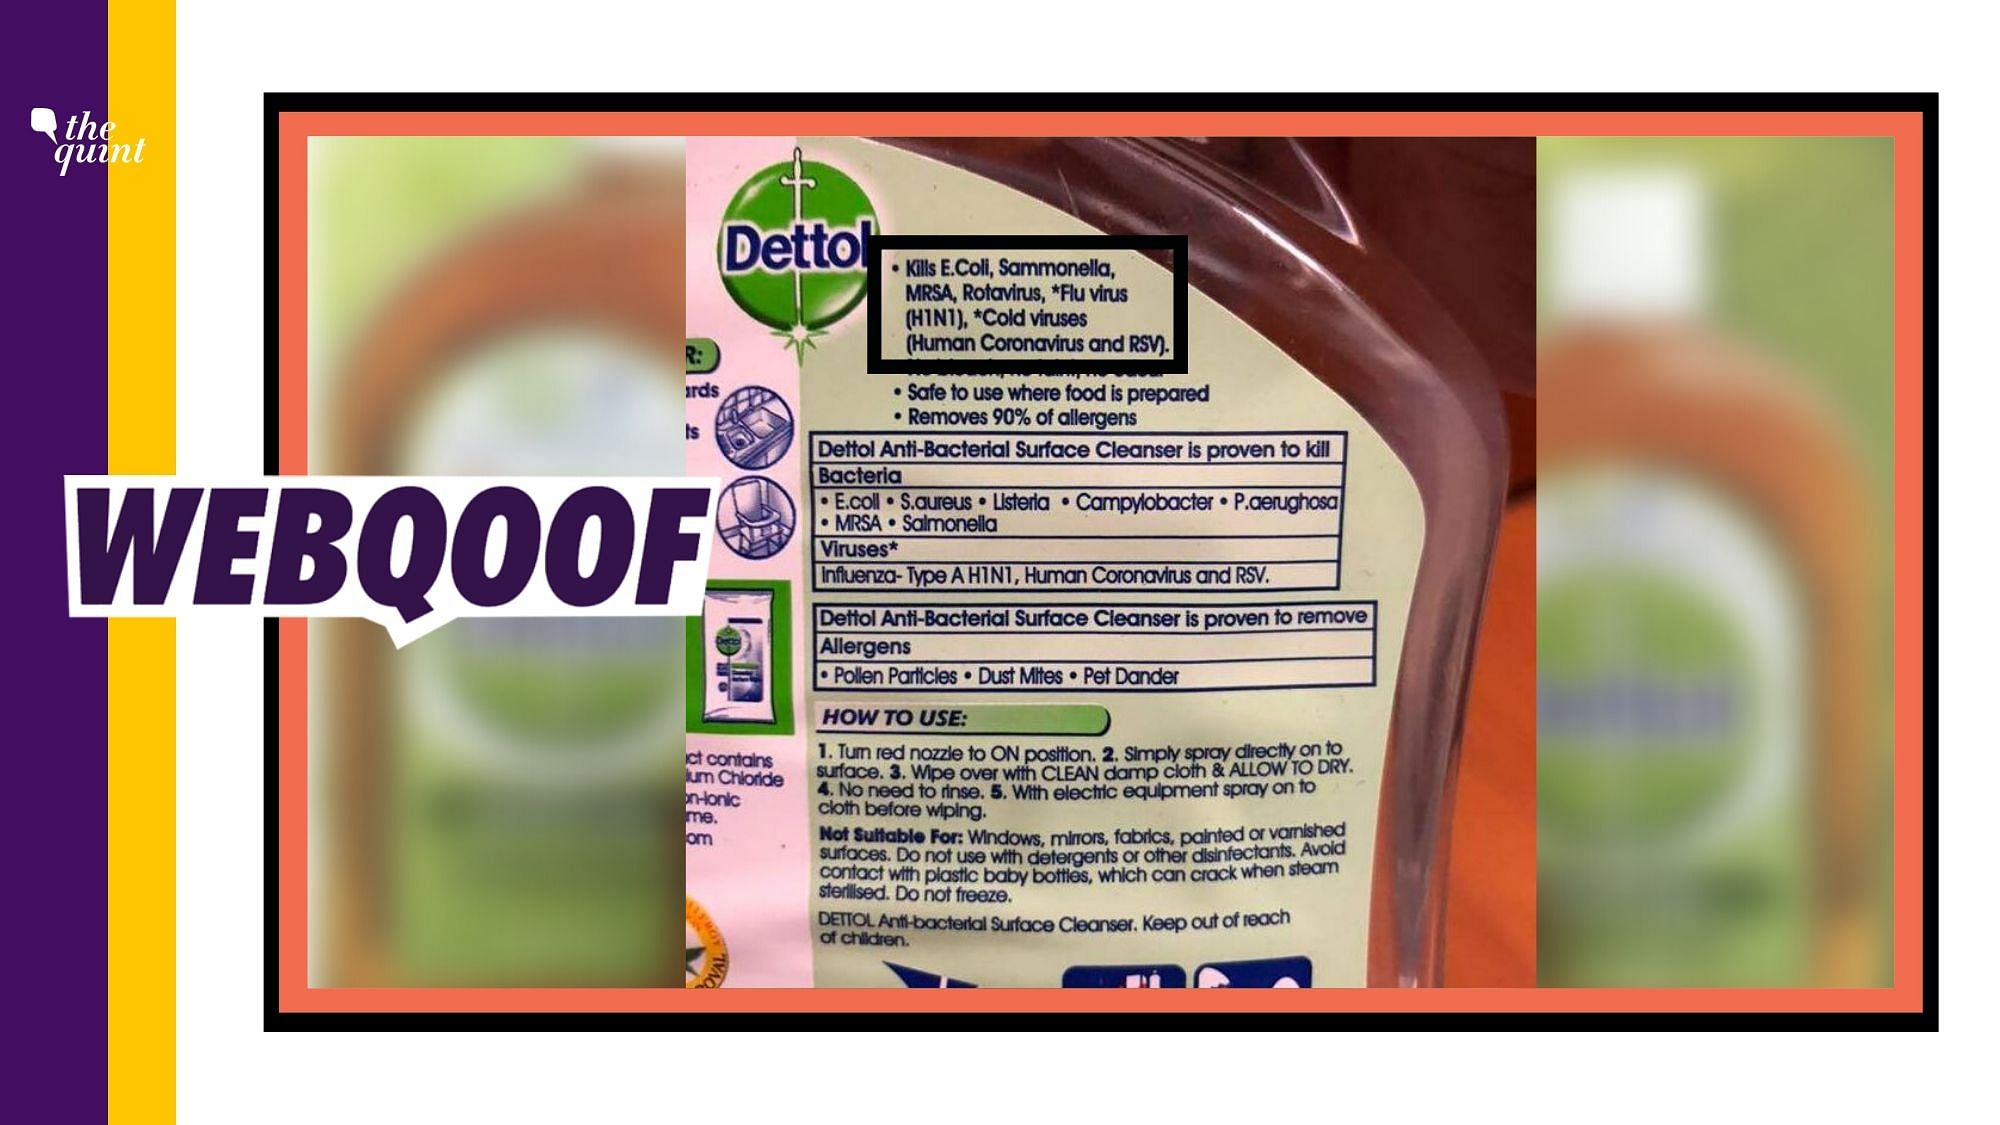 Viral images are being circulated on social media to claim that Dettol knew about the novel coronavirus even before the outbreak was officially announced.&nbsp;